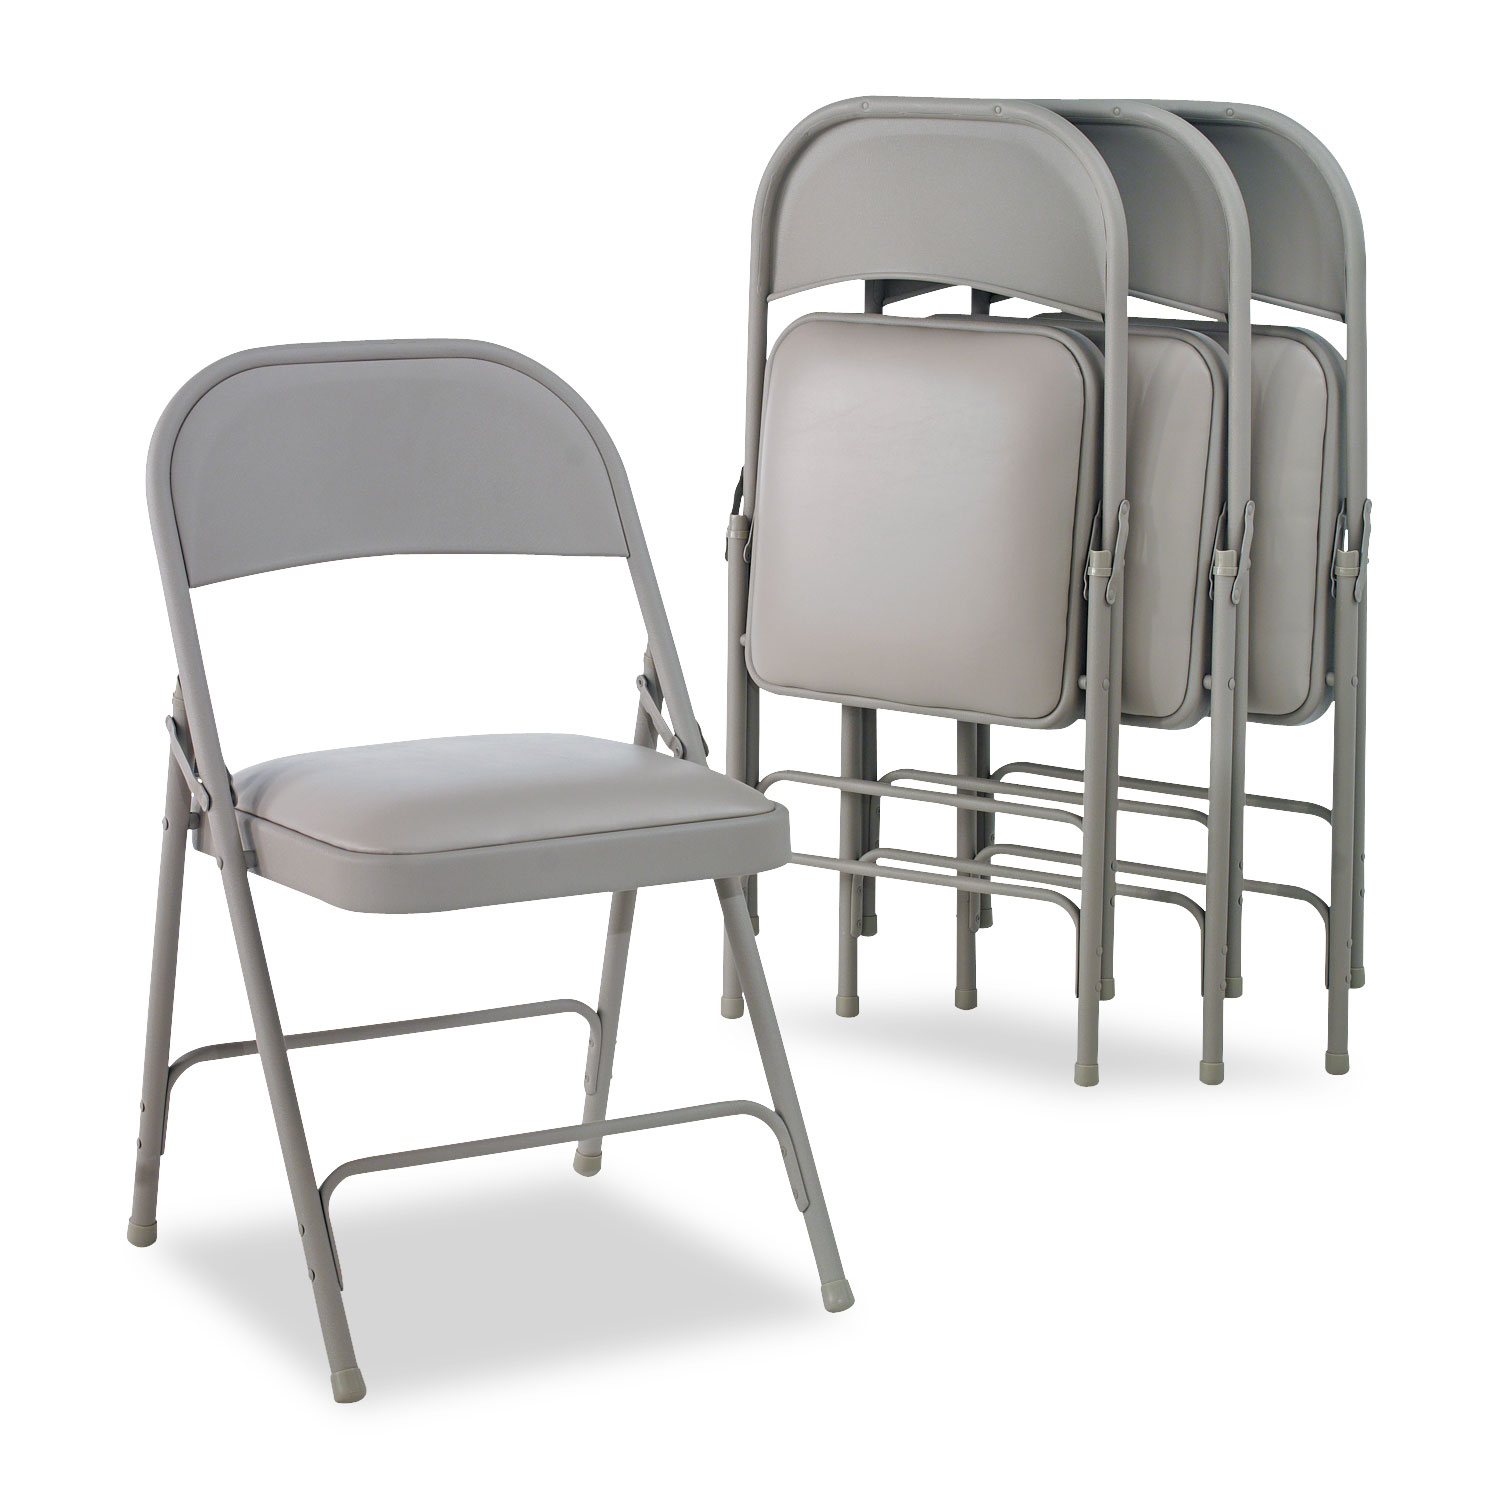 Steel Folding Chair with Two-Brace Support, Light Gray Seat/Light Gray Back, Light Gray Base, 4/Carton